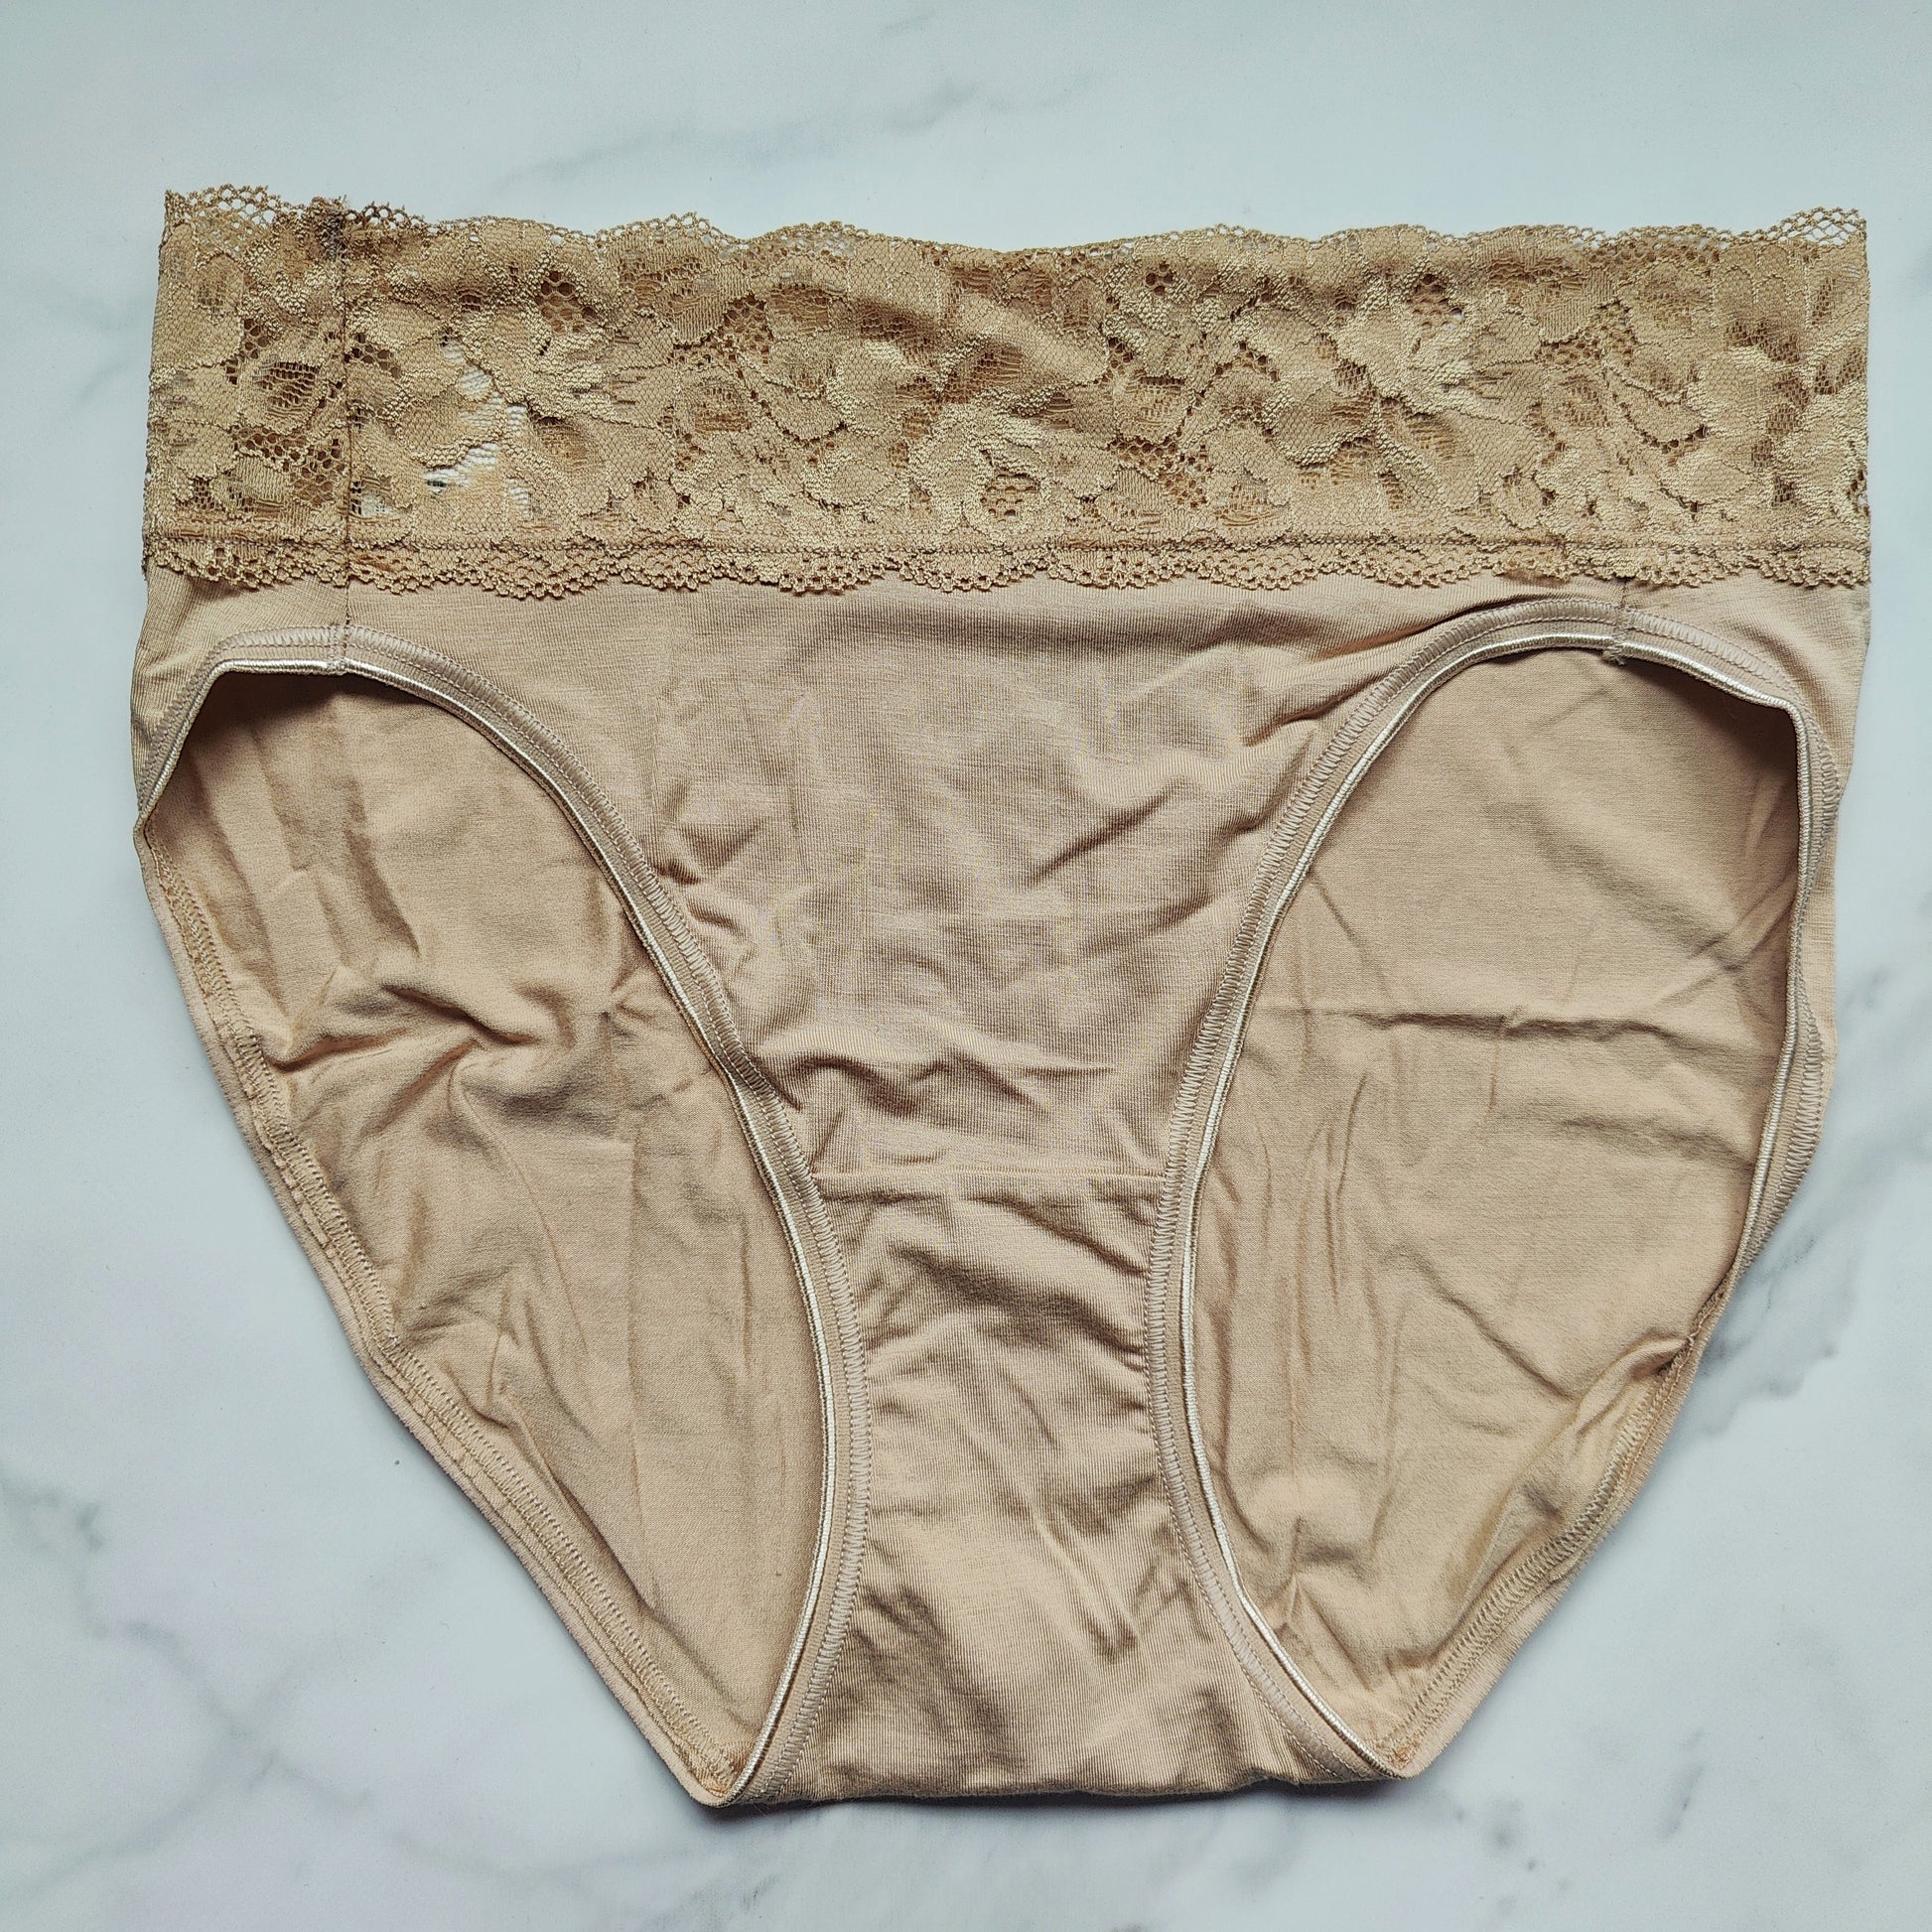 Soma Lace Panties for Women